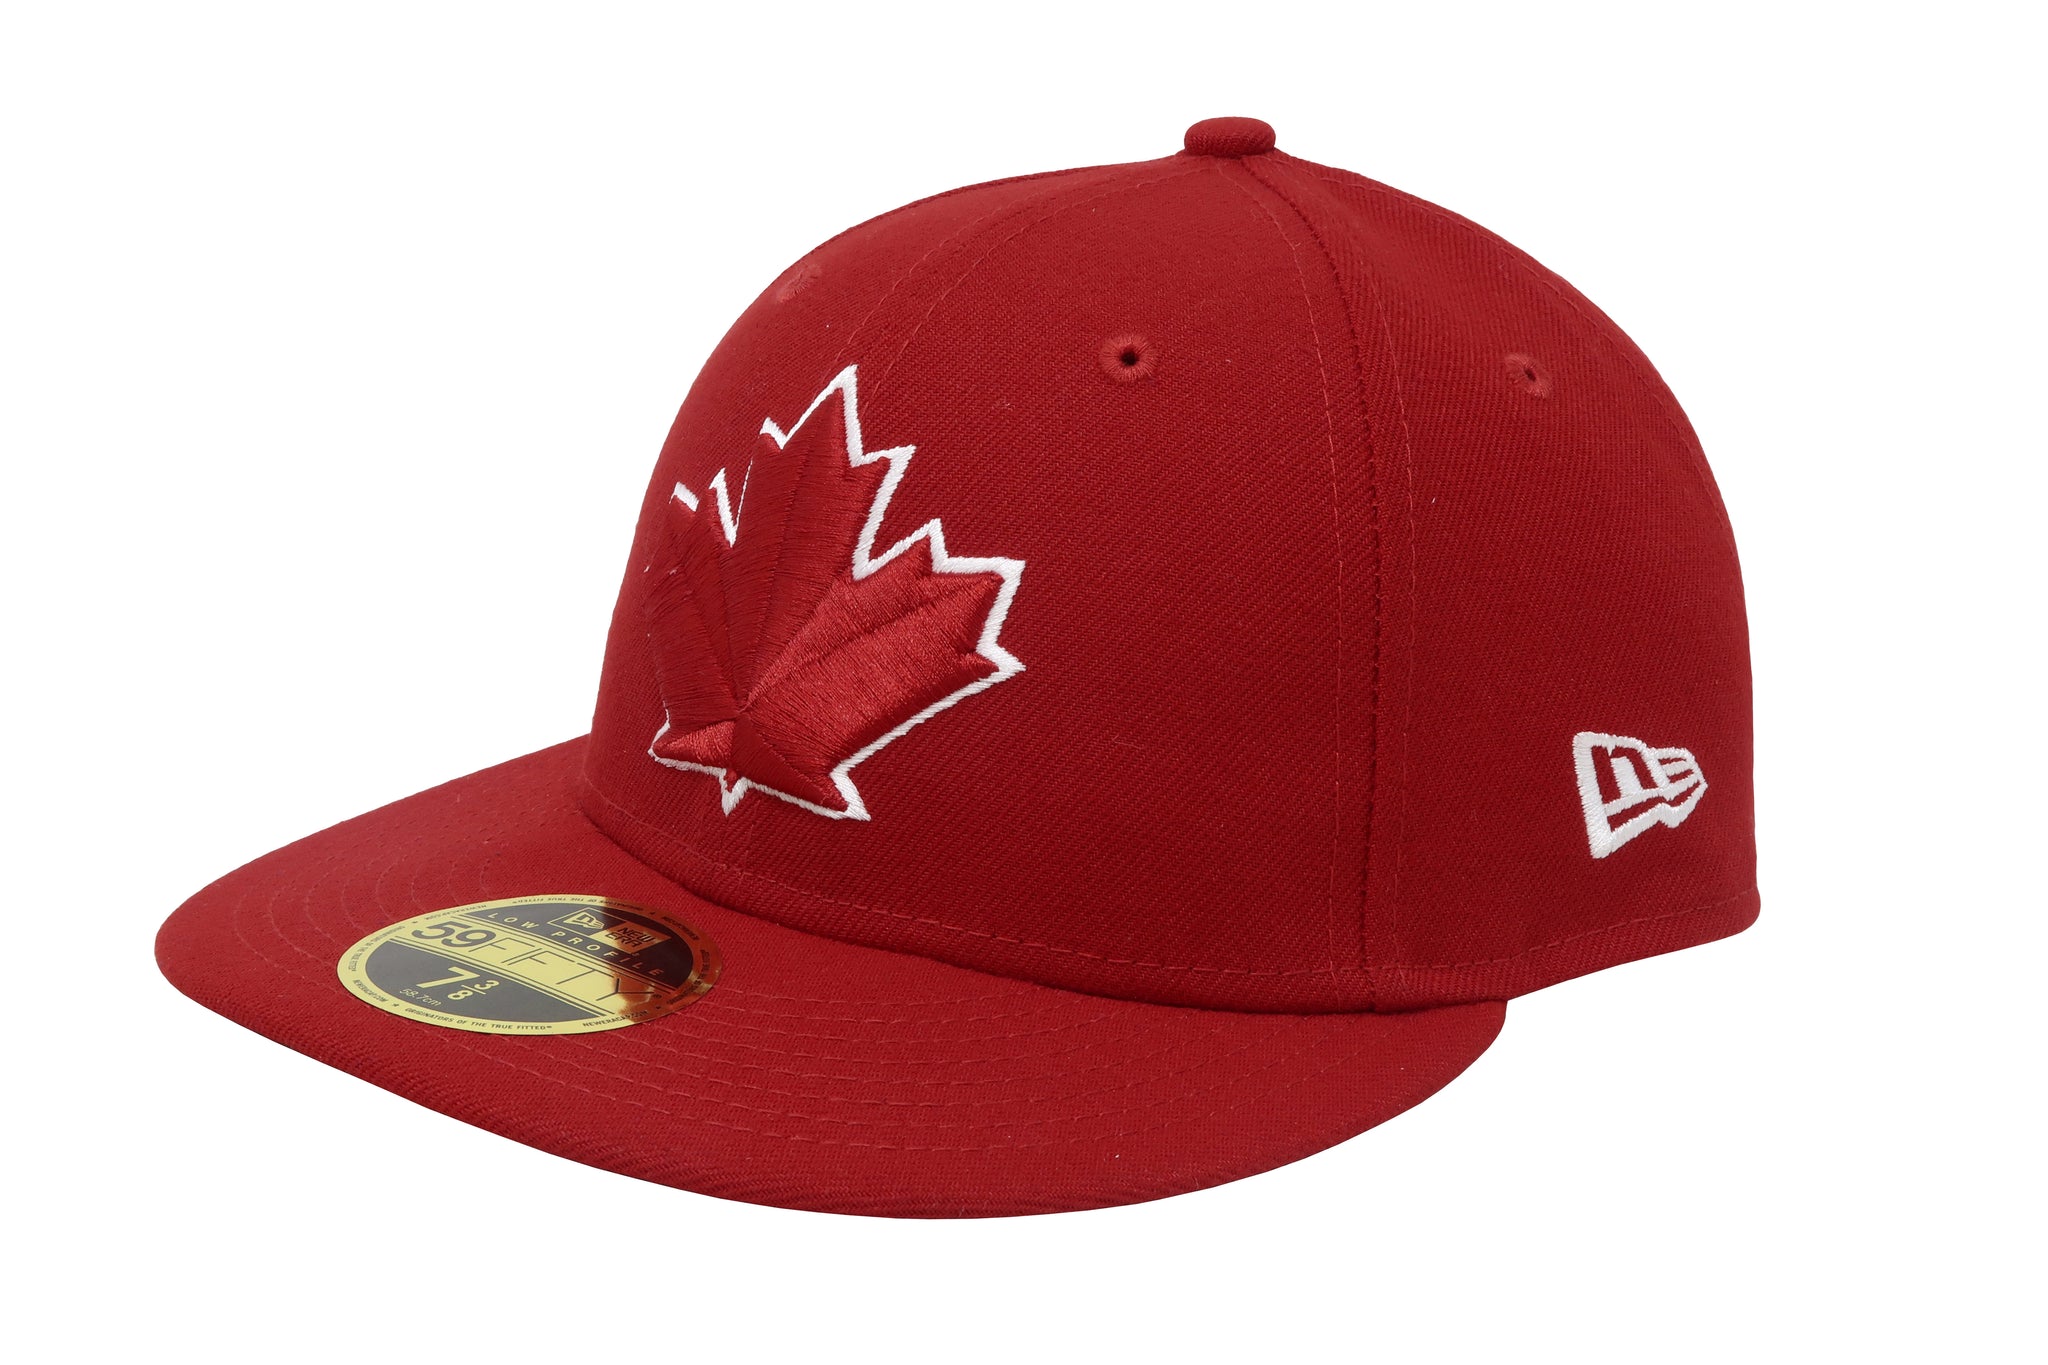 New Era 59Fifty Men's Toronto Blue Jays Low Profile Red Fitted Hat